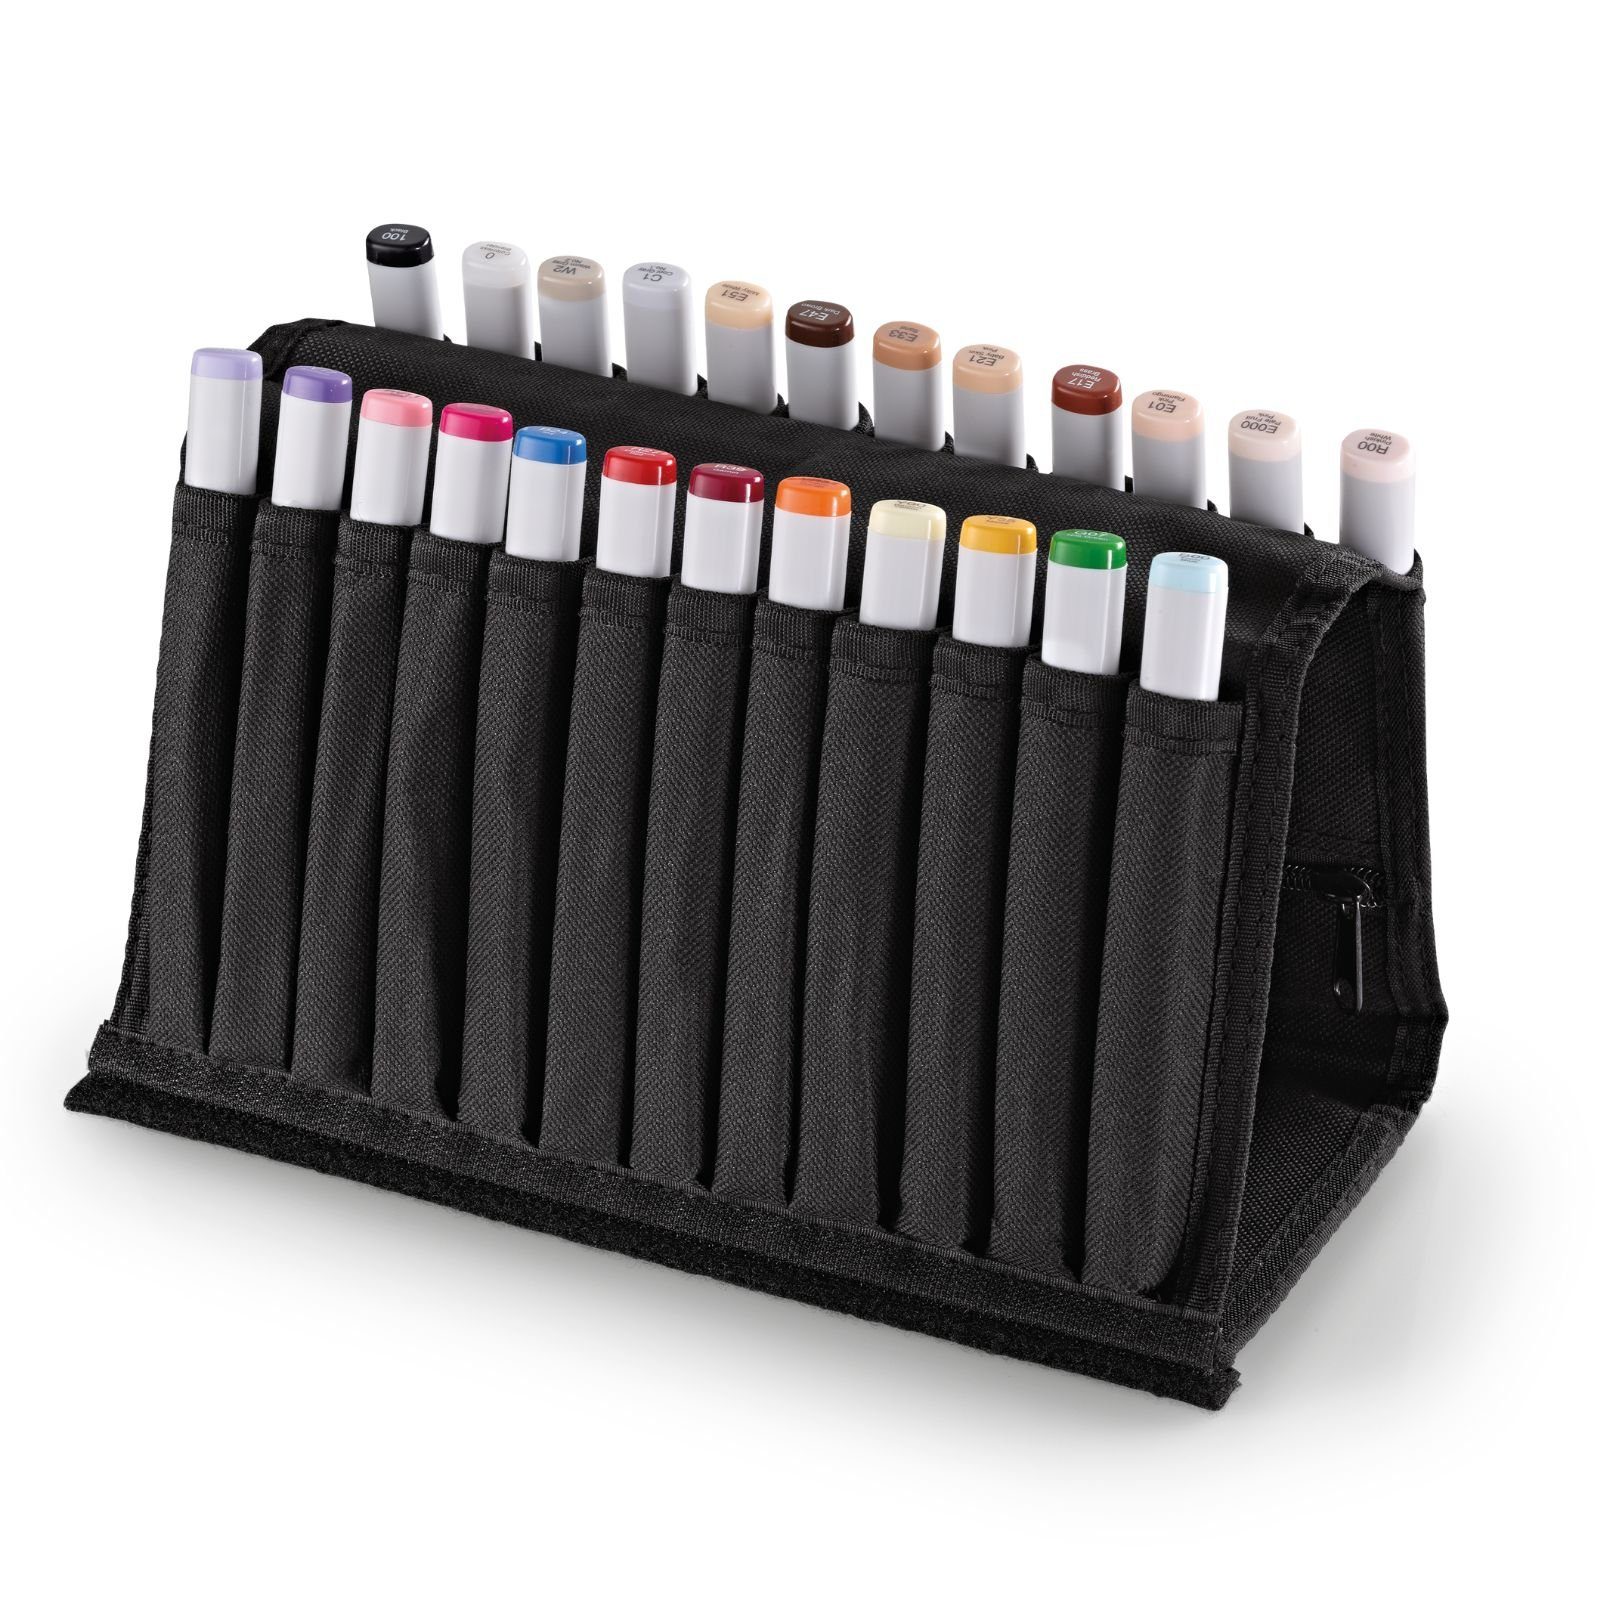 COPIC Copic Marker COPIC Sketch 24er Wallet - Starter